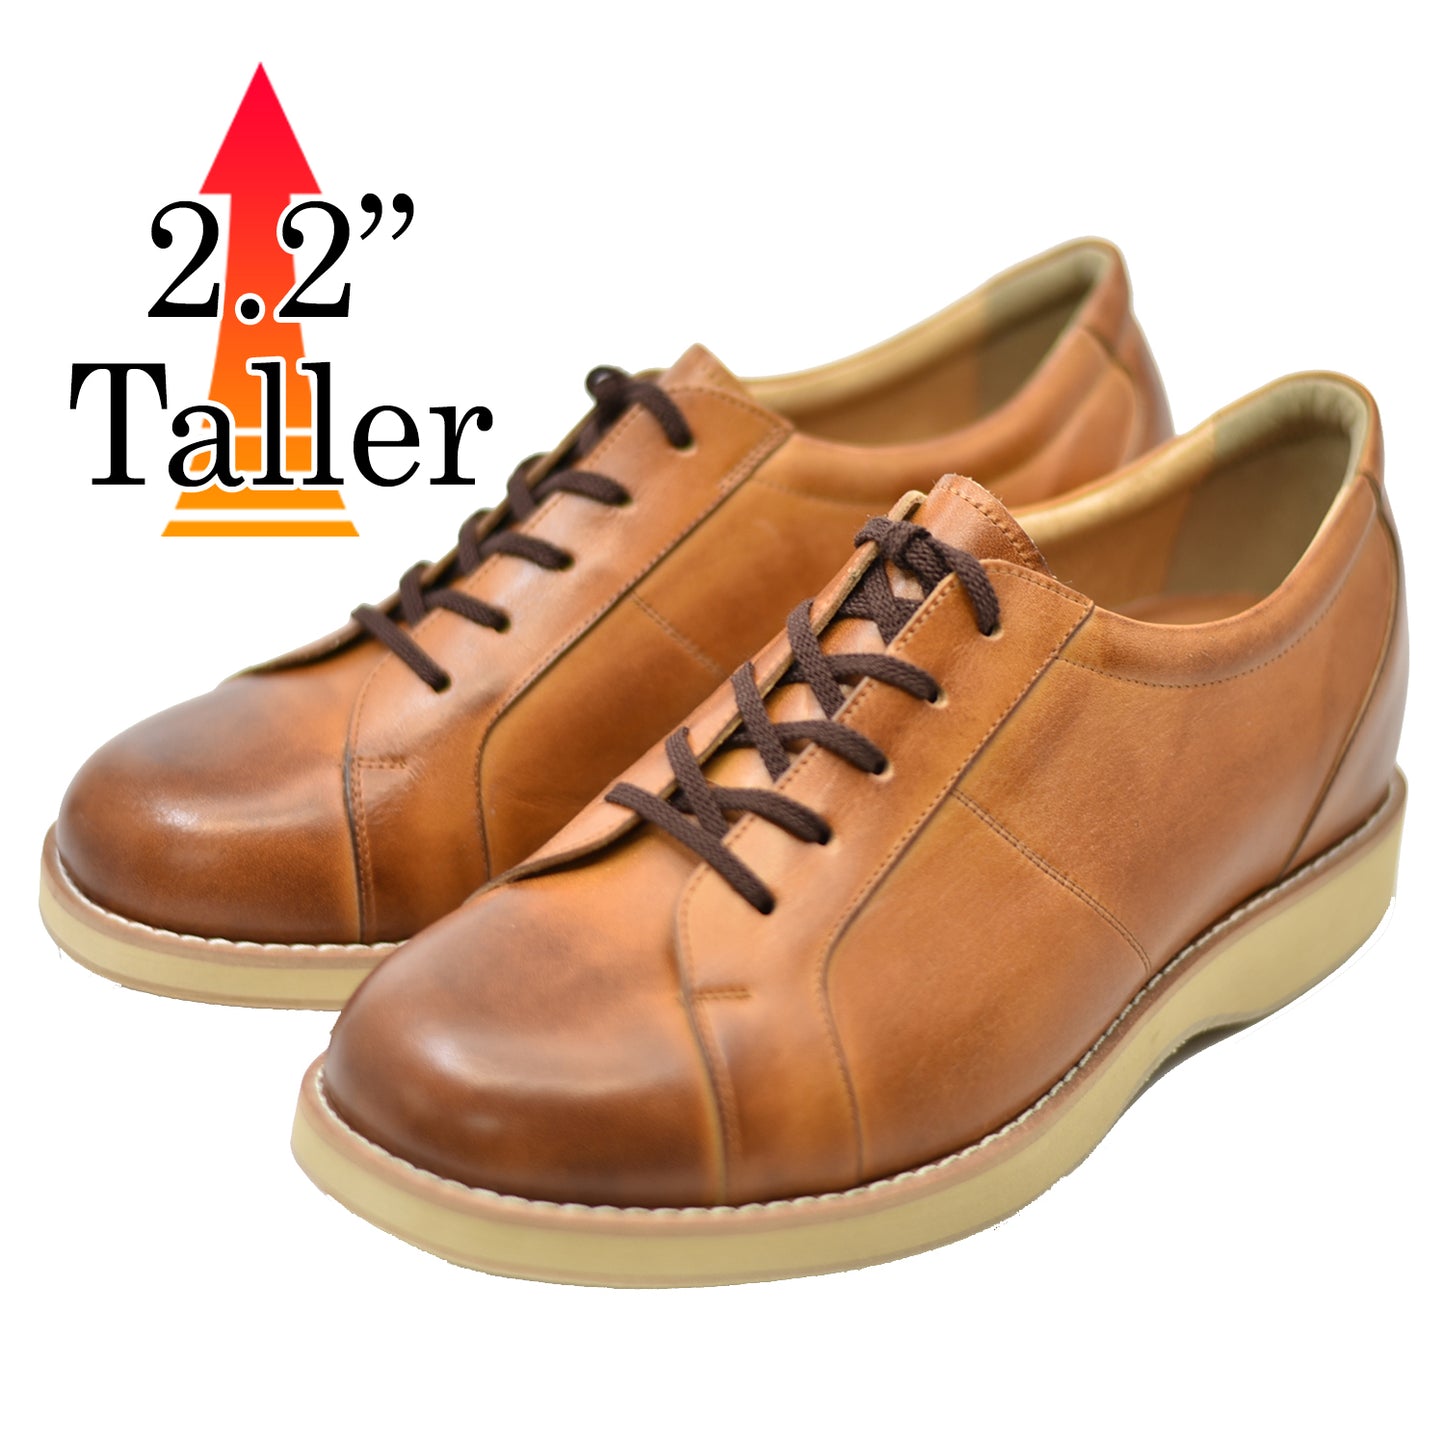 Men's Elevator Shoes Height Increasing 2.2" Taller Casual Shoes Genuine Leather Fashion Sneaker No. 516